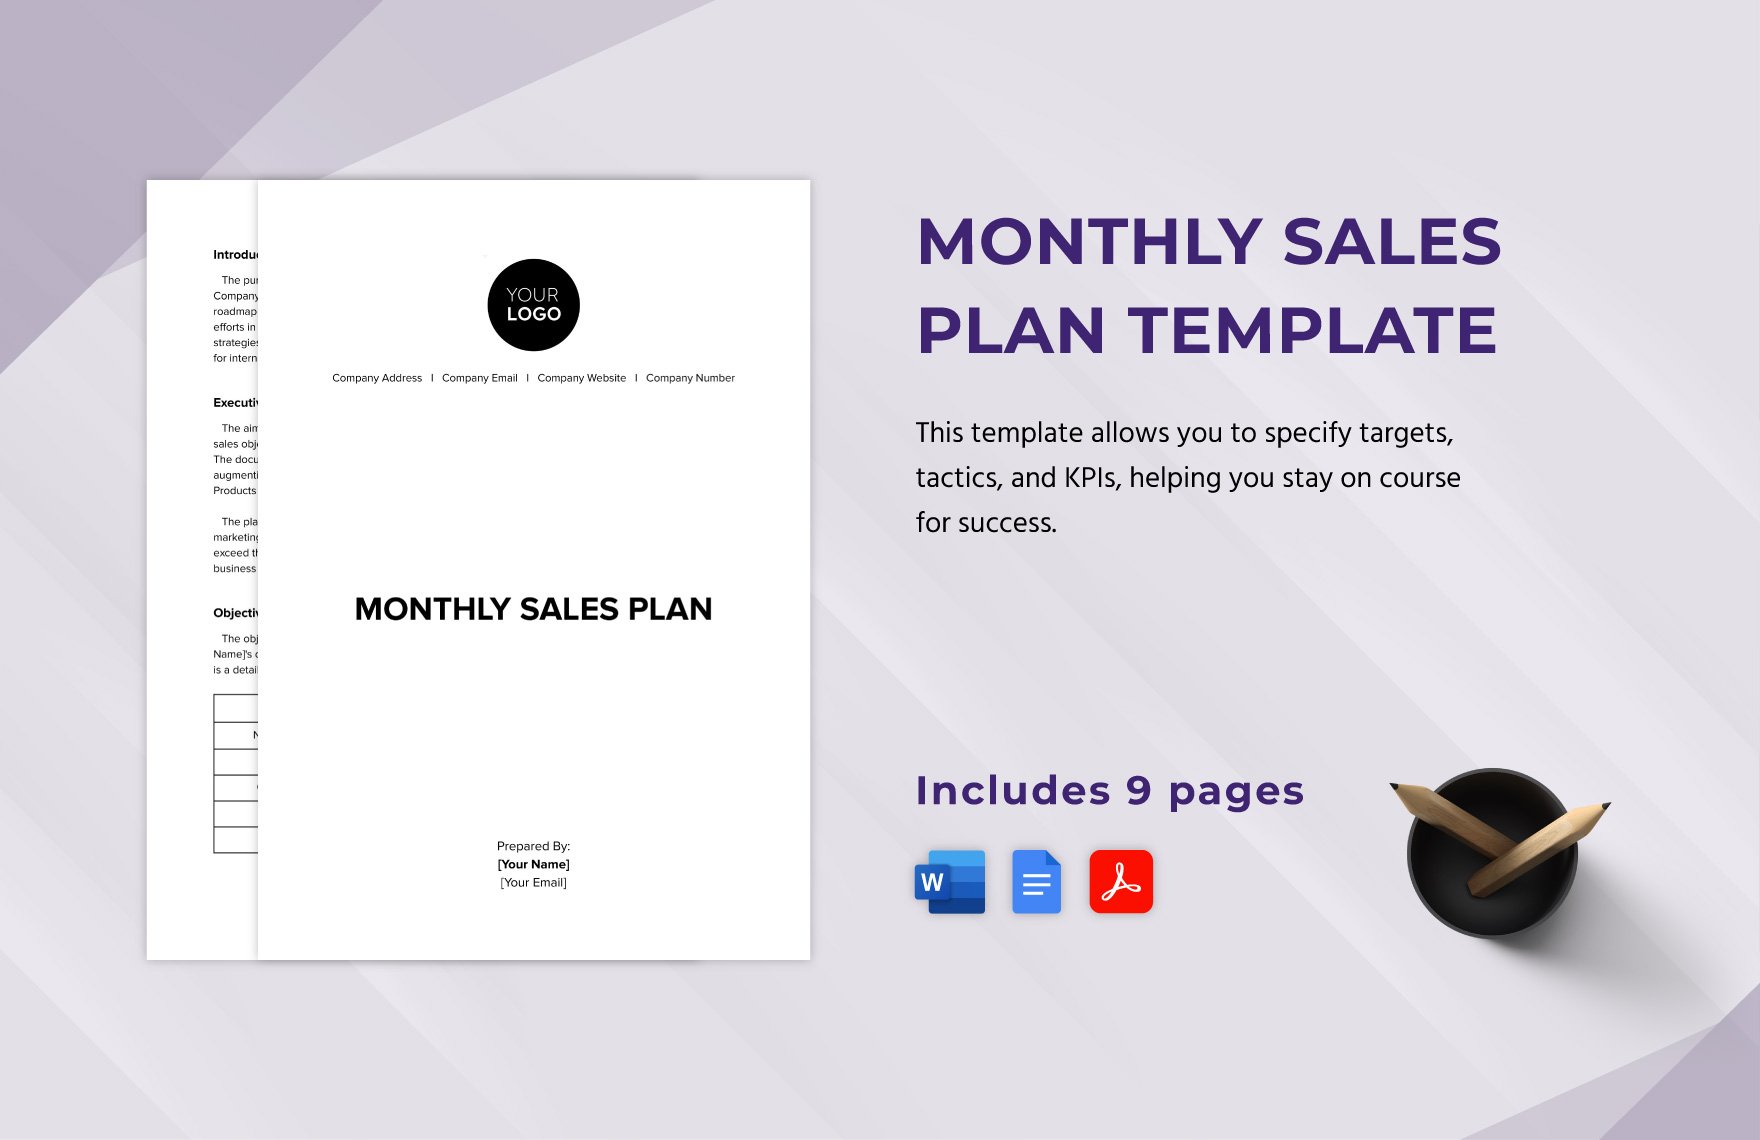 Monthly Sales Plan Template in Word, Google Docs, PDF